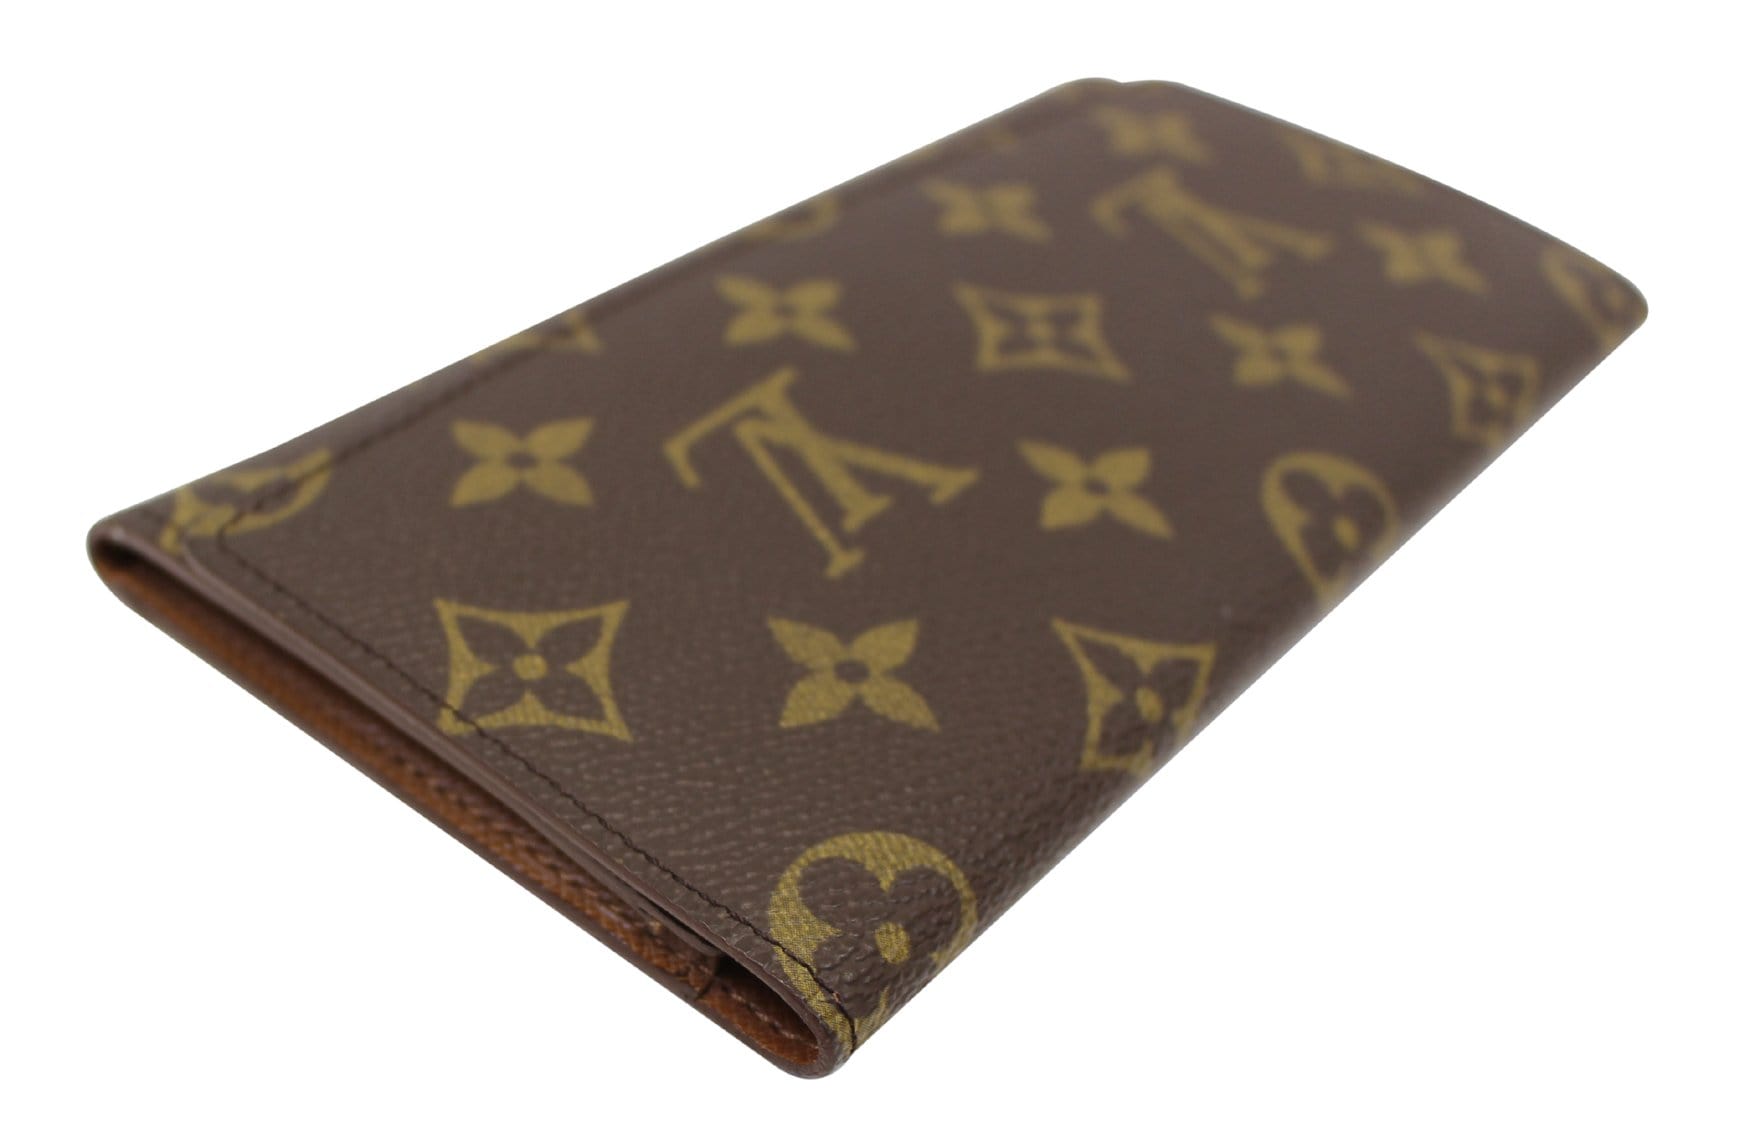 Louis Vuitton Brown Canvas Wallet (Pre-Owned)